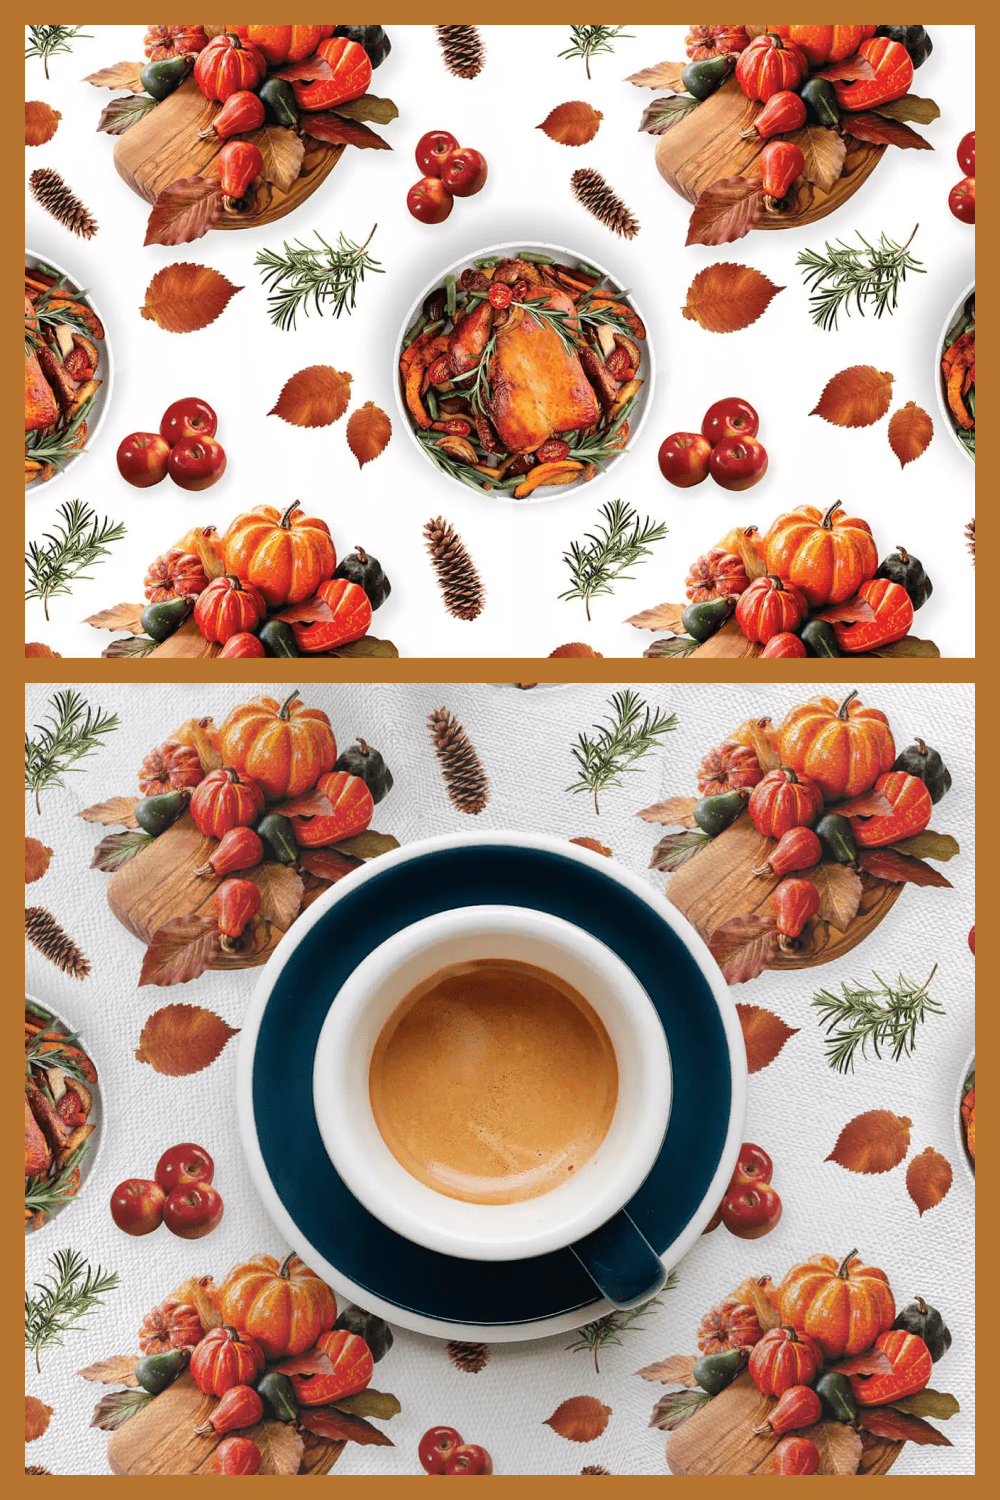 Turkey on a plate, pumpkins and a cup of coffee on a saucer on a white background.